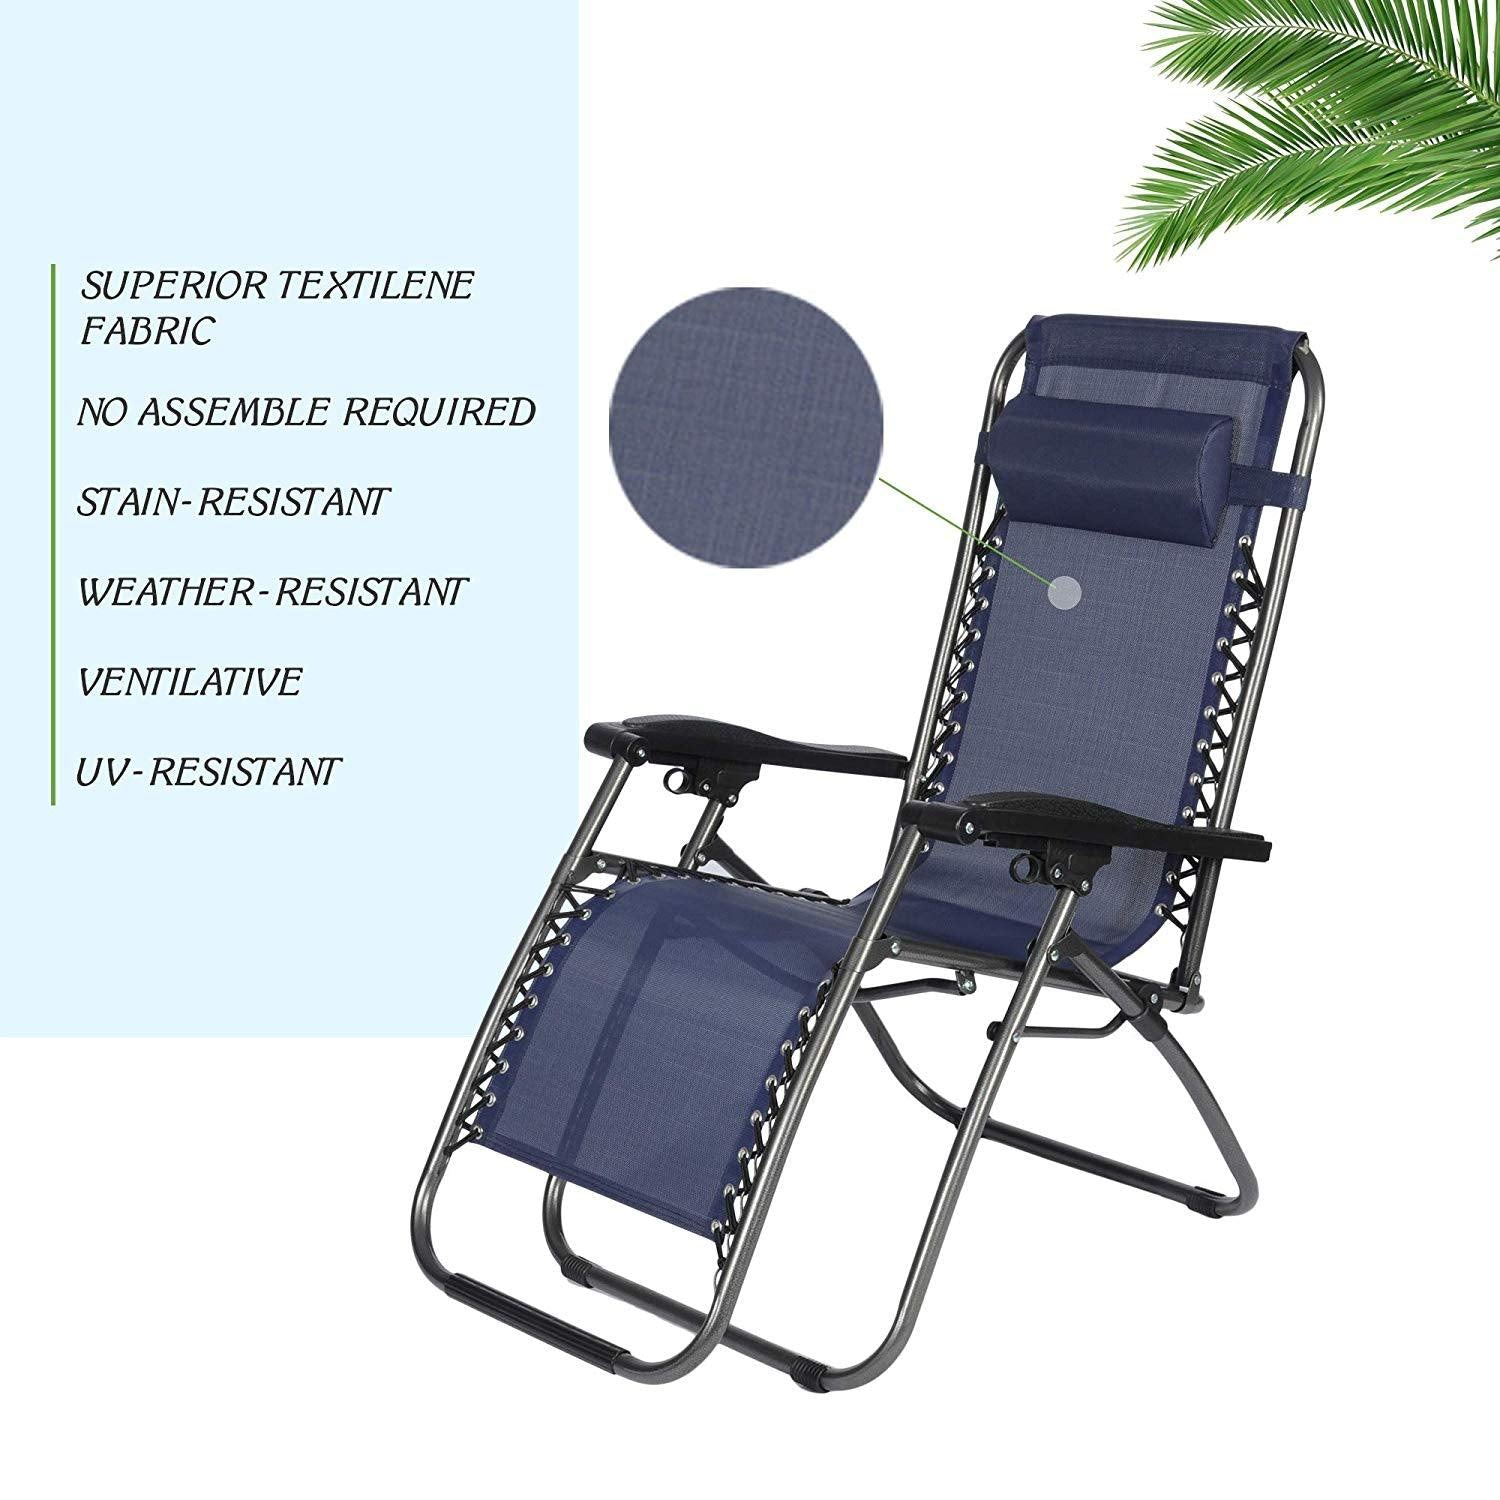 Mydepot Adjustable Zero Gravity Patio Lounge Chairs, 2PC Blue, Patio Chairs, Comfortable, Durable, Outdoor Seating - image 2 of 7